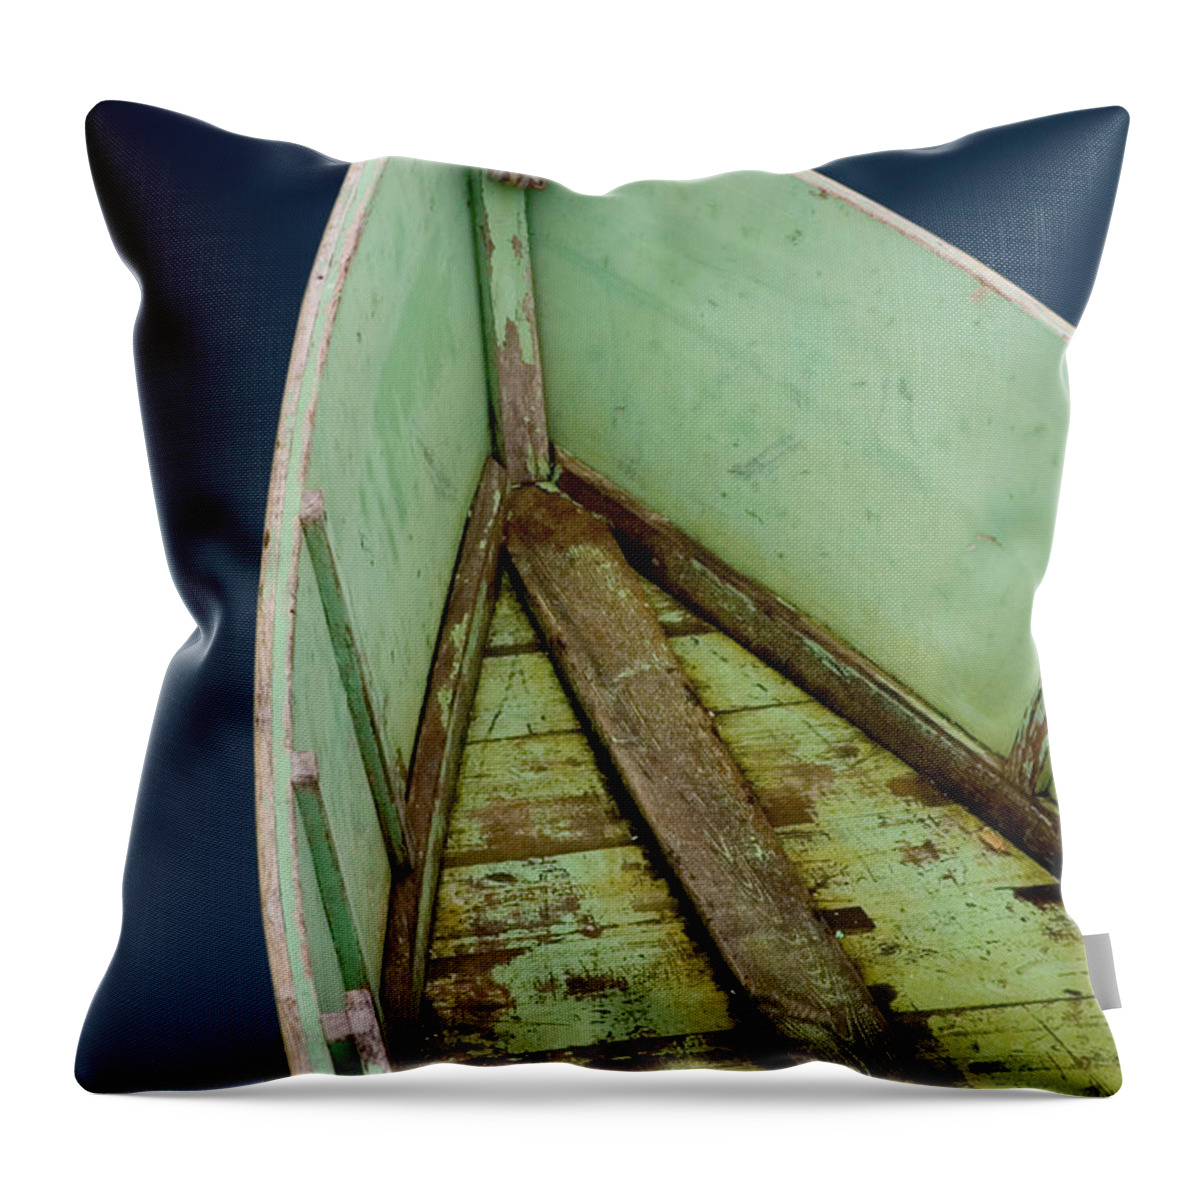 Boat Throw Pillow featuring the photograph Green Boat by Brent L Ander